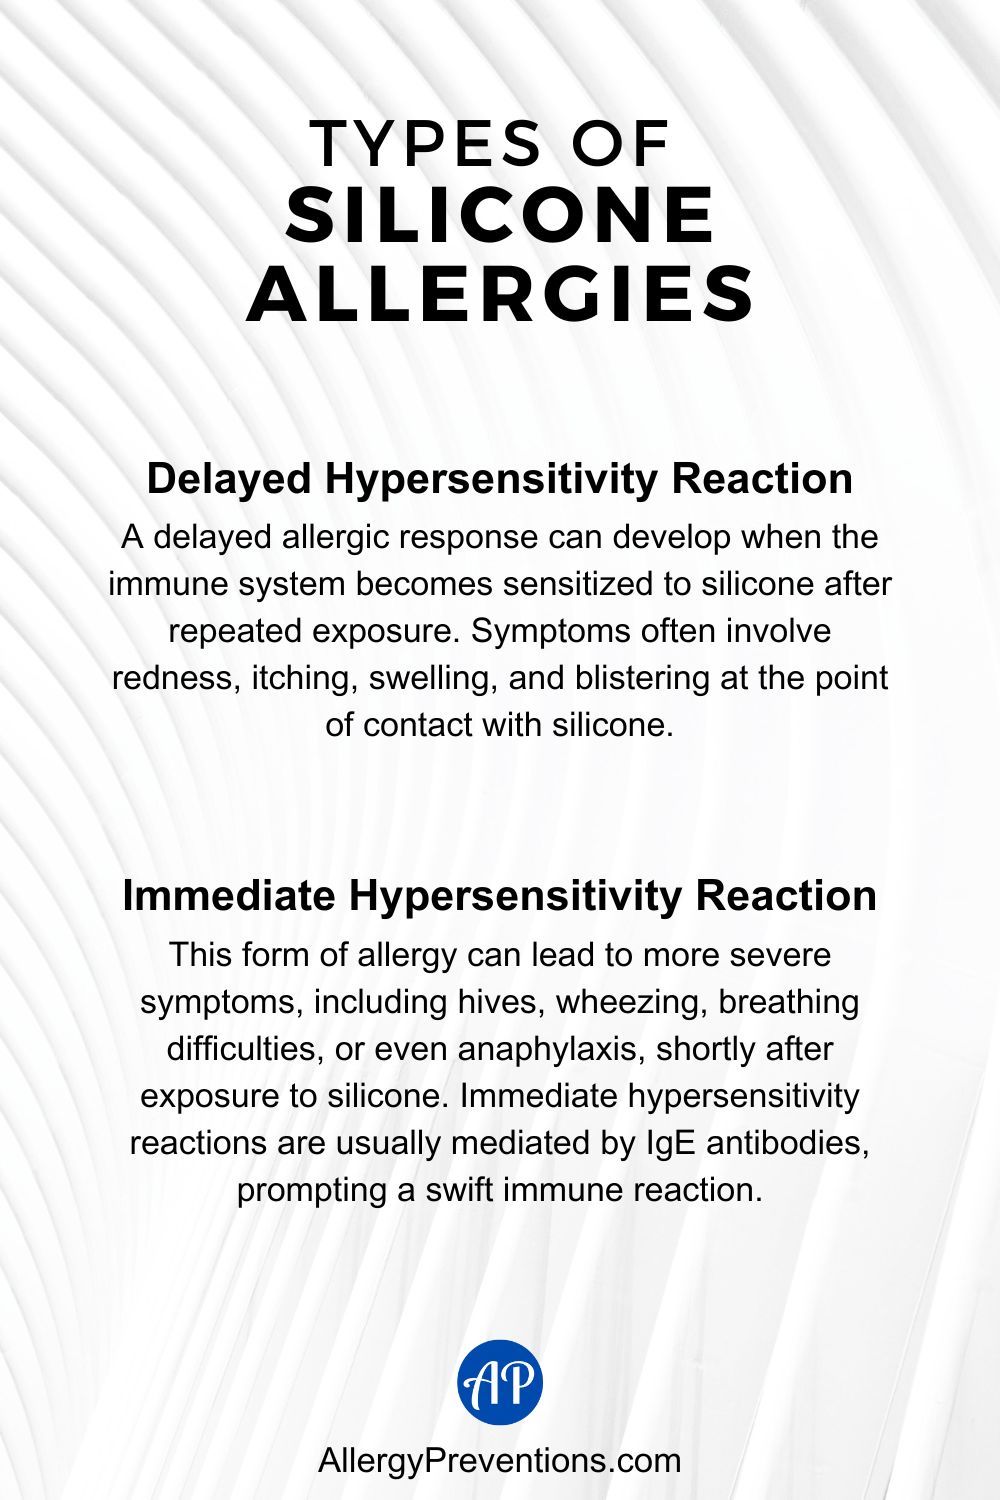 Types of Silicone Allergies Infographic. Delayed Hypersensitivity Reaction: A delayed allergic response can develop when the immune system becomes sensitized to silicone after repeated exposure. Symptoms often involve redness, itching, swelling, and blistering at the point of contact with silicone. Immediate Hypersensitivity Reaction: This form of allergy can lead to more severe symptoms, including hives, wheezing, breathing difficulties, or even anaphylaxis, shortly after exposure to silicone. Immediate hypersensitivity reactions are usually mediated by IgE antibodies, prompting a swift immune reaction.